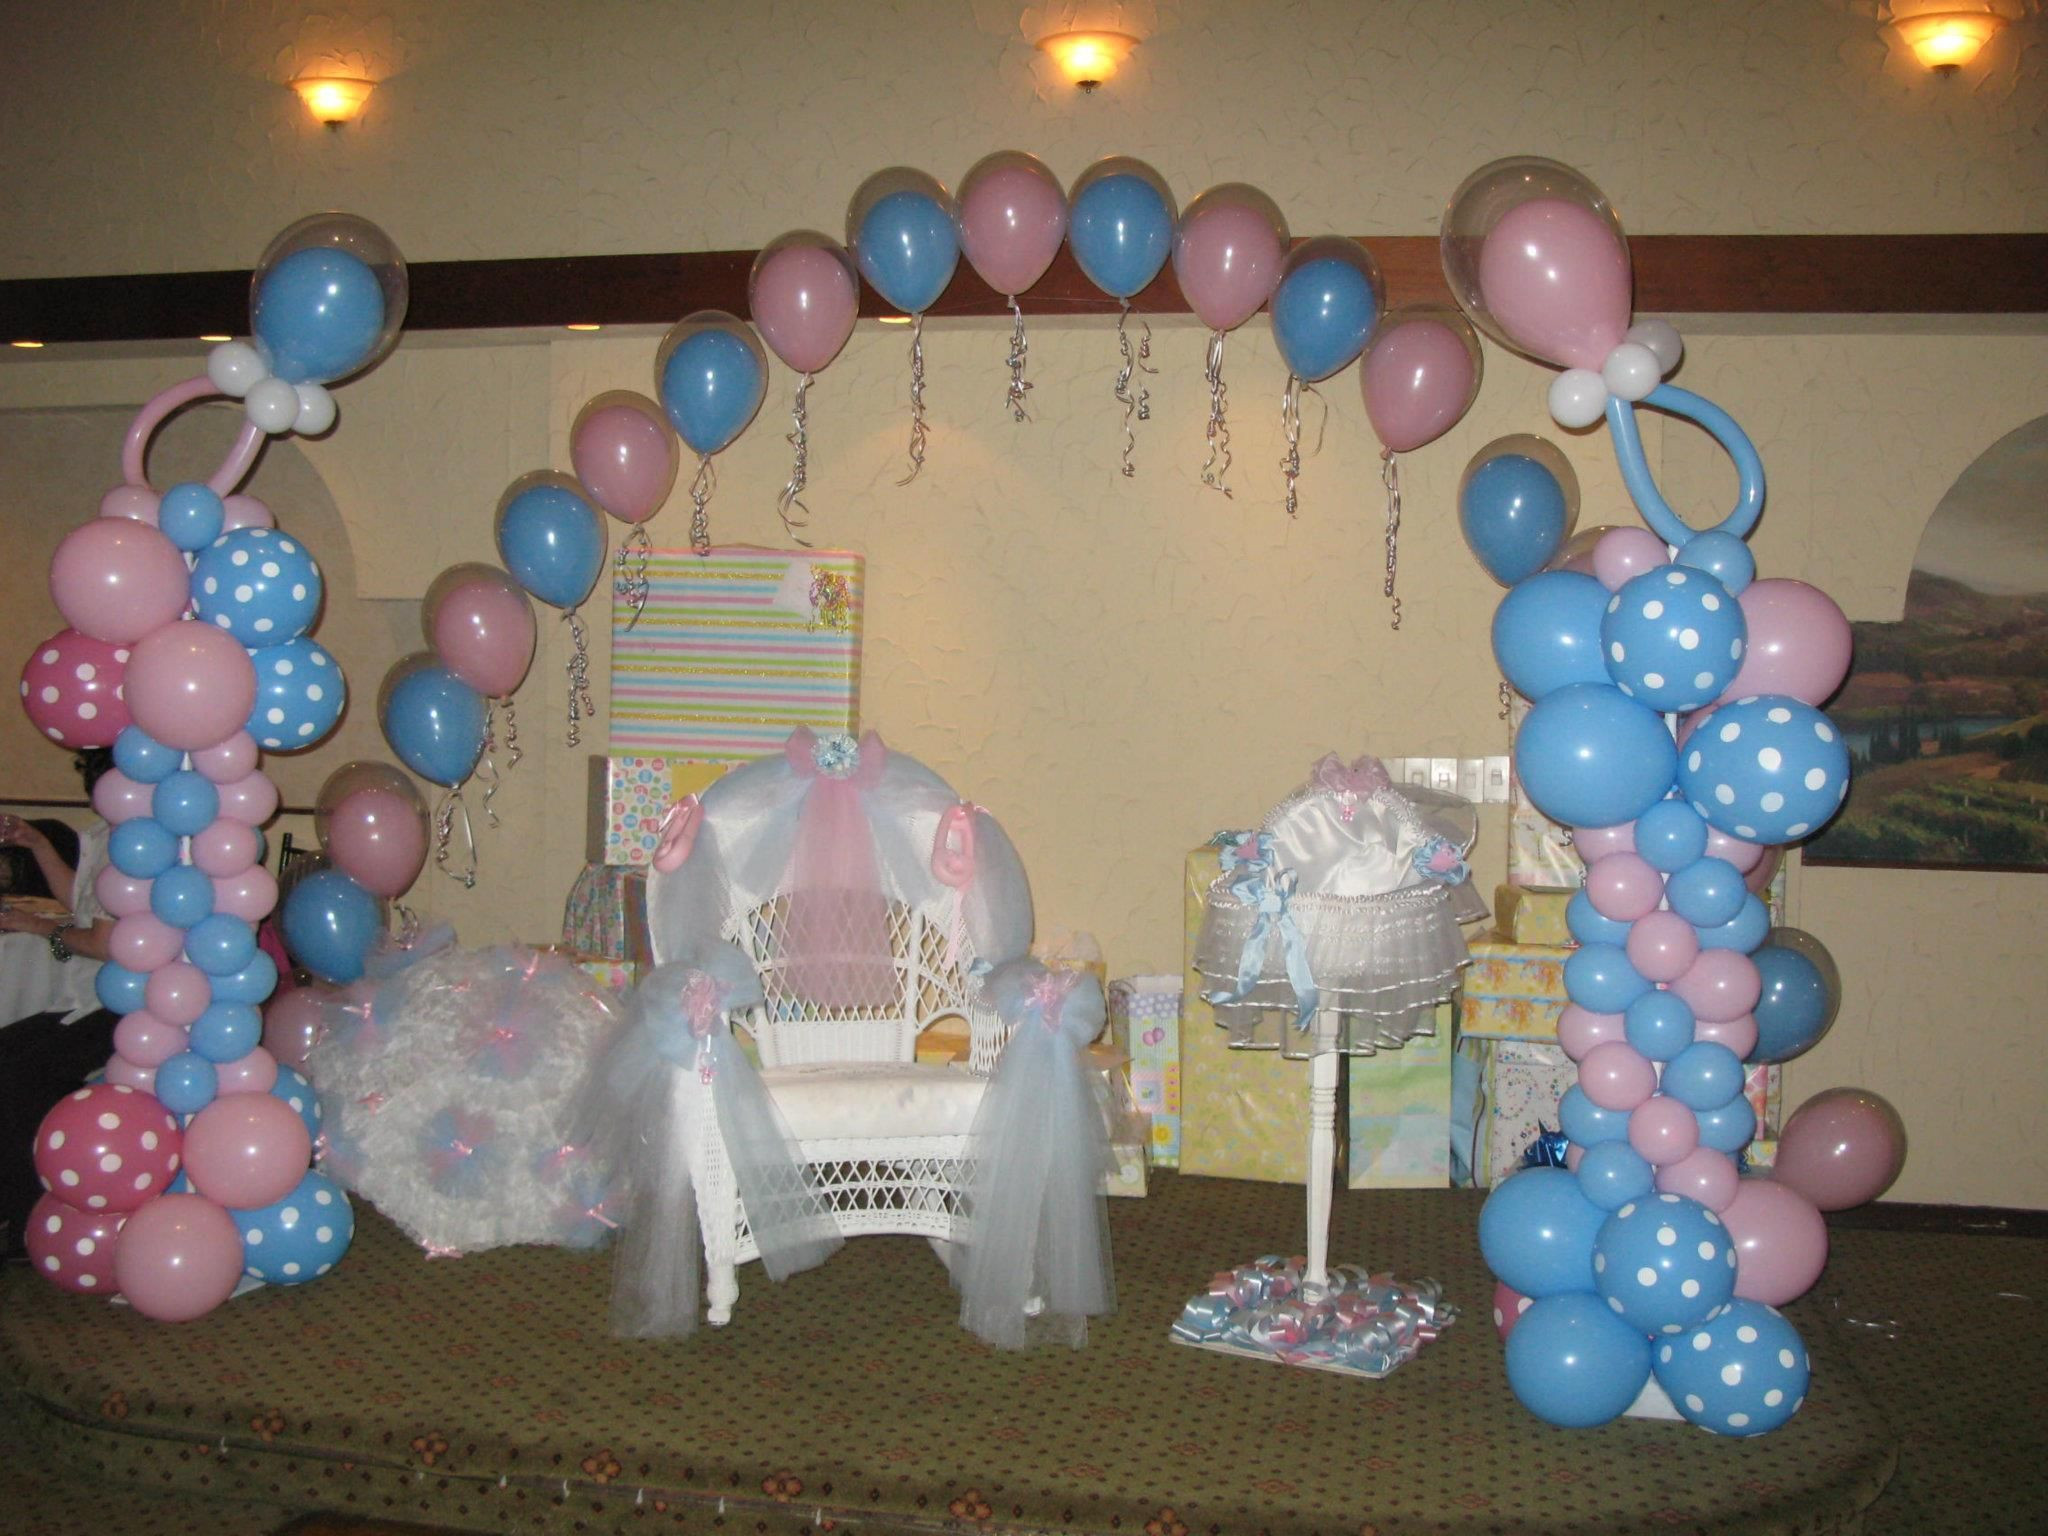 Balloon Decoration Baby Shower Ideas
 Decor Galore Balloon Decorations for pink & blue baby